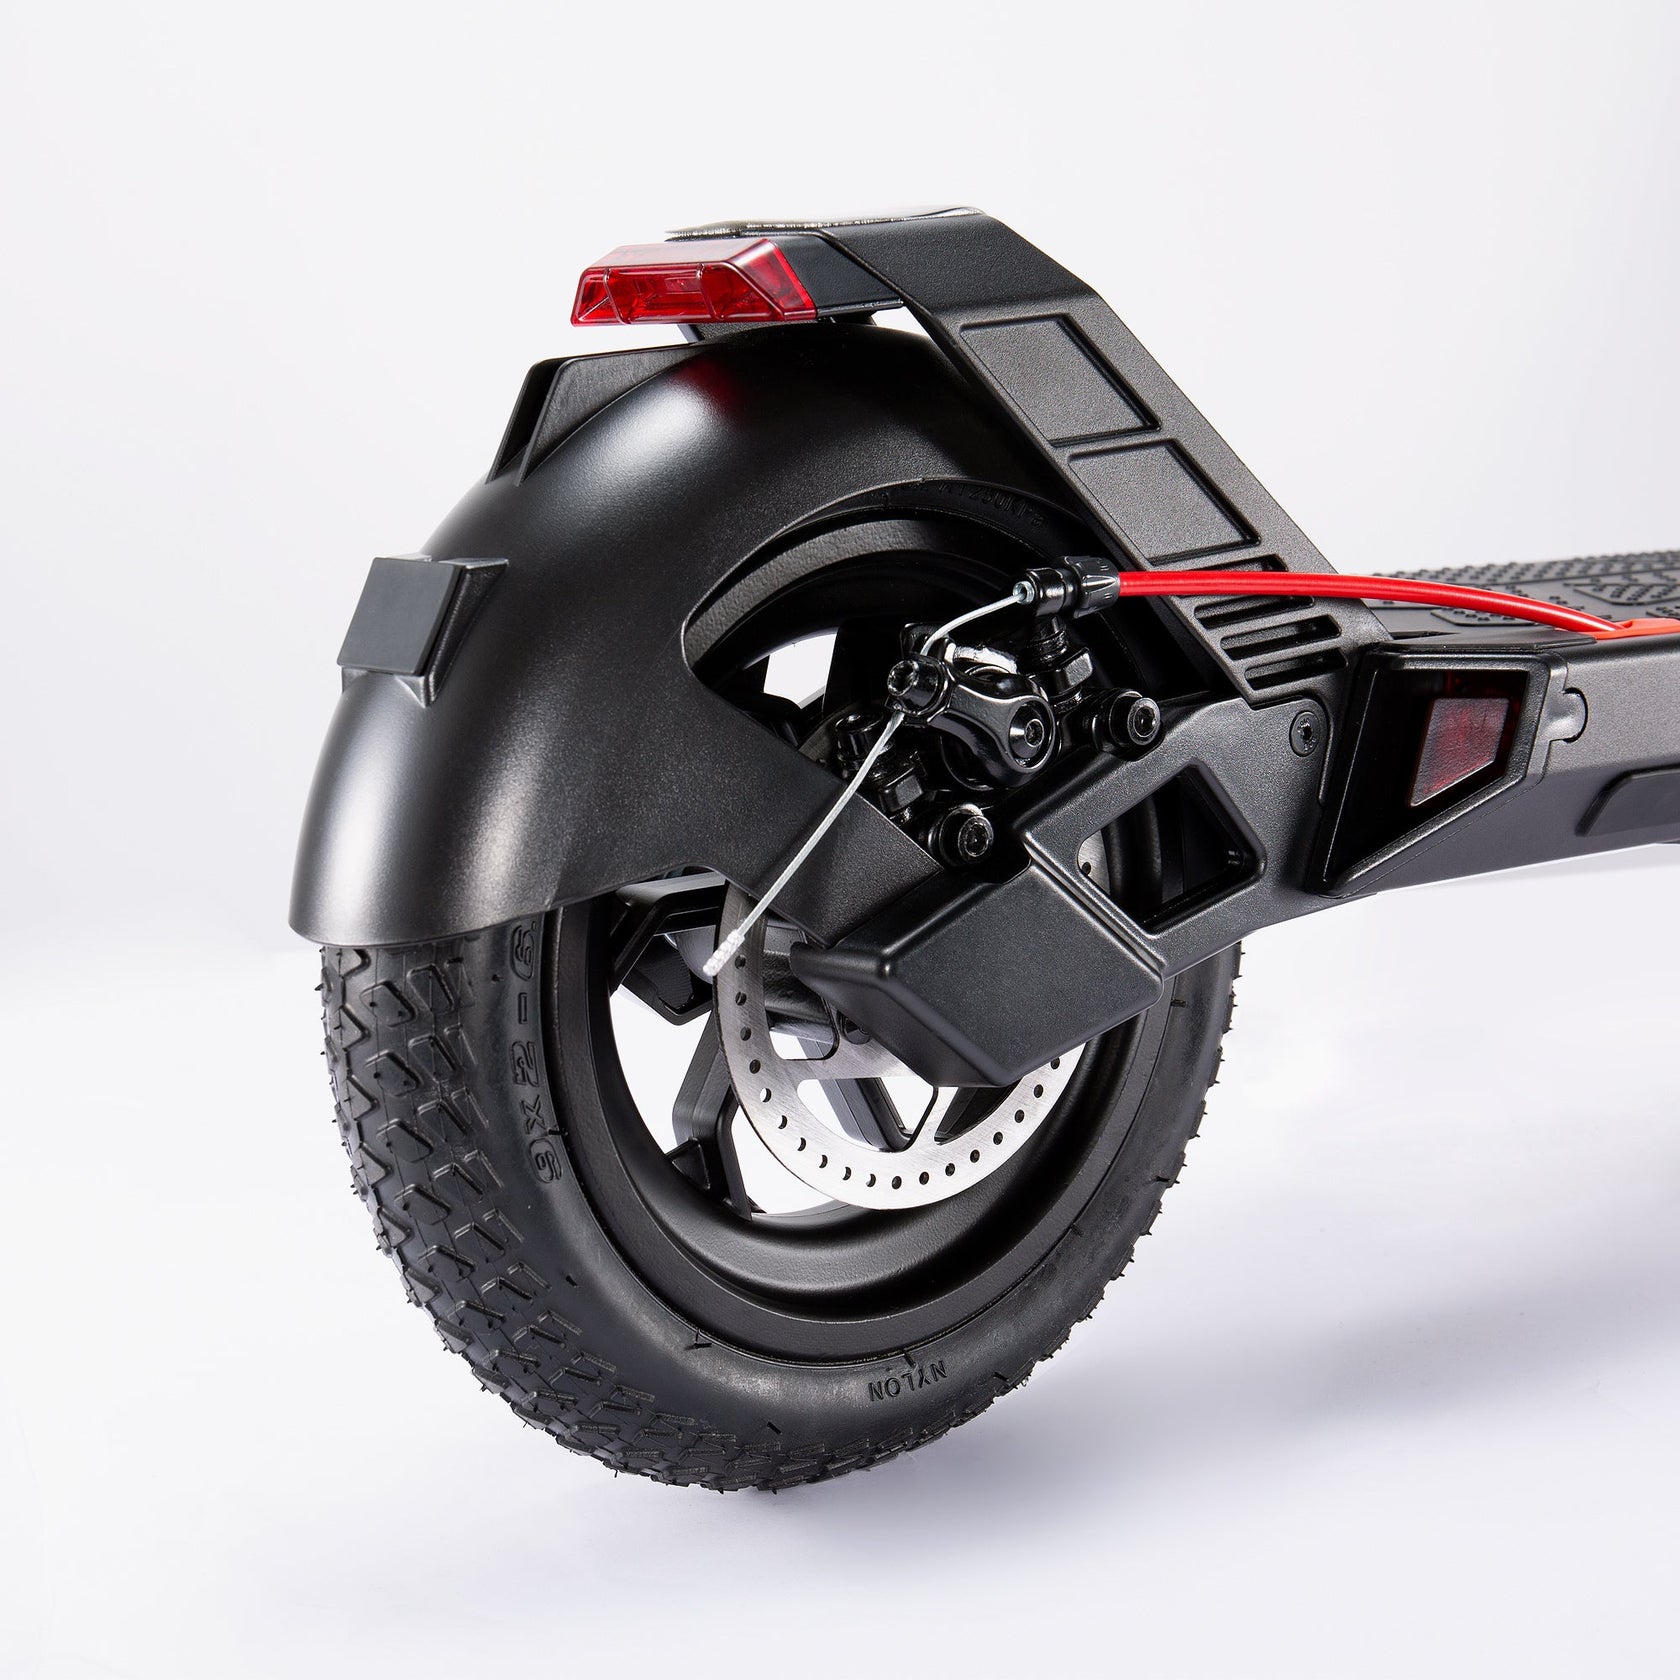 TurboAnt V8 Dual-Battery Electric Scooter